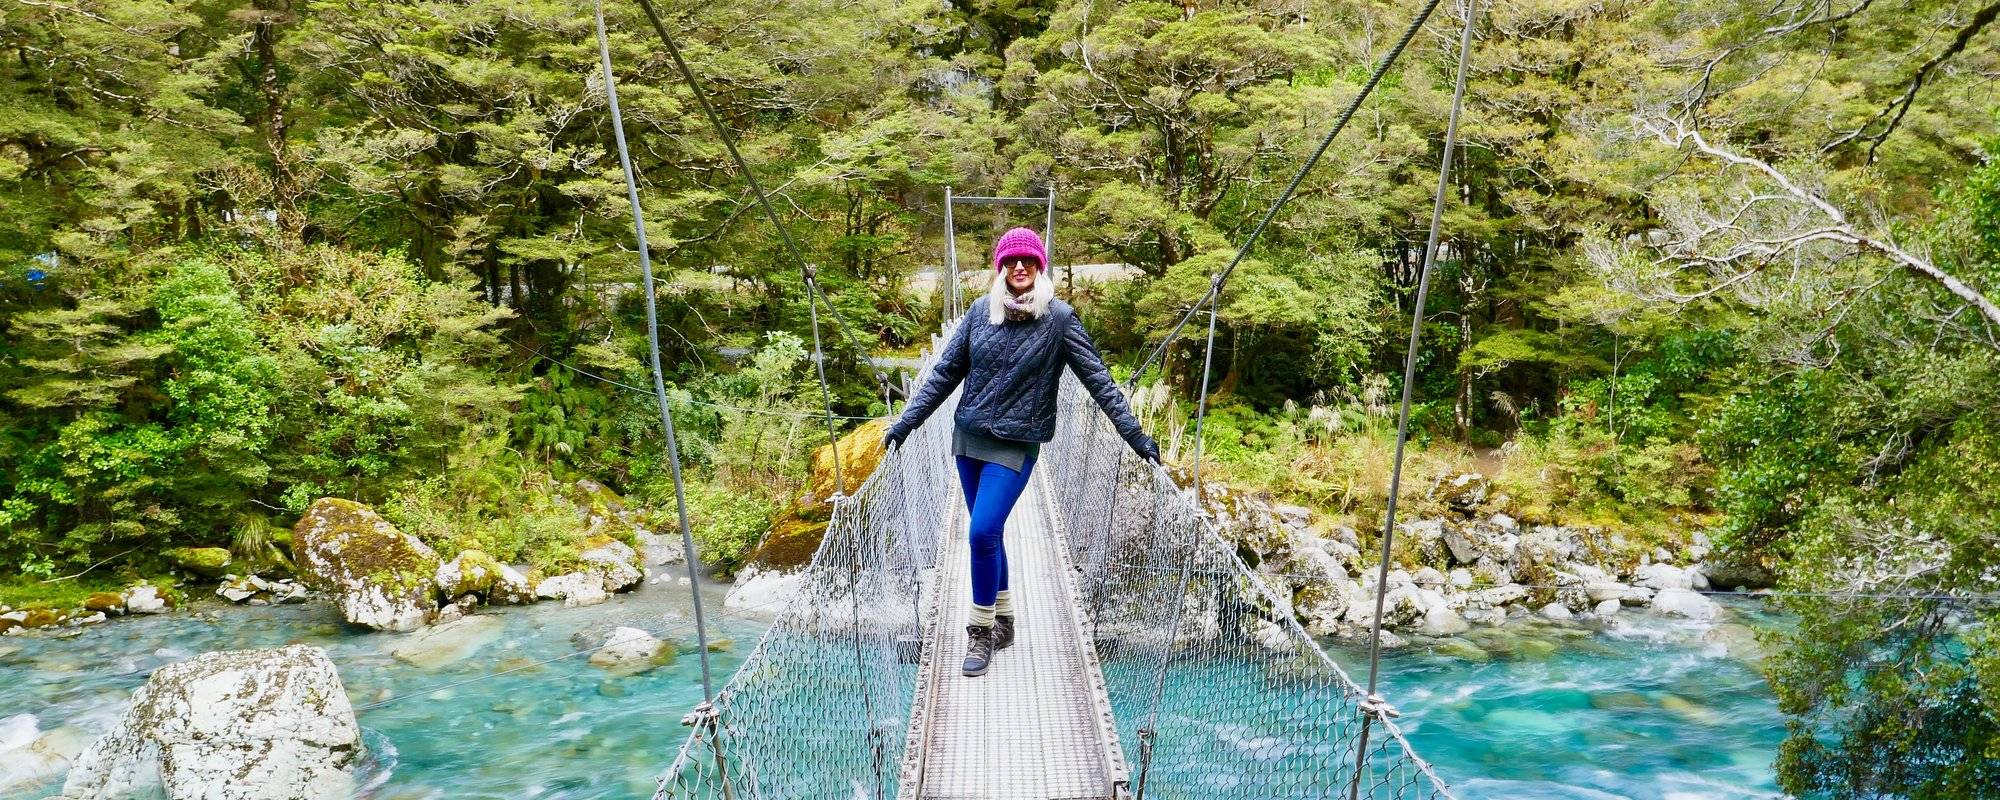 Aussie's in New Zealand: Fiordland - Greens and blues